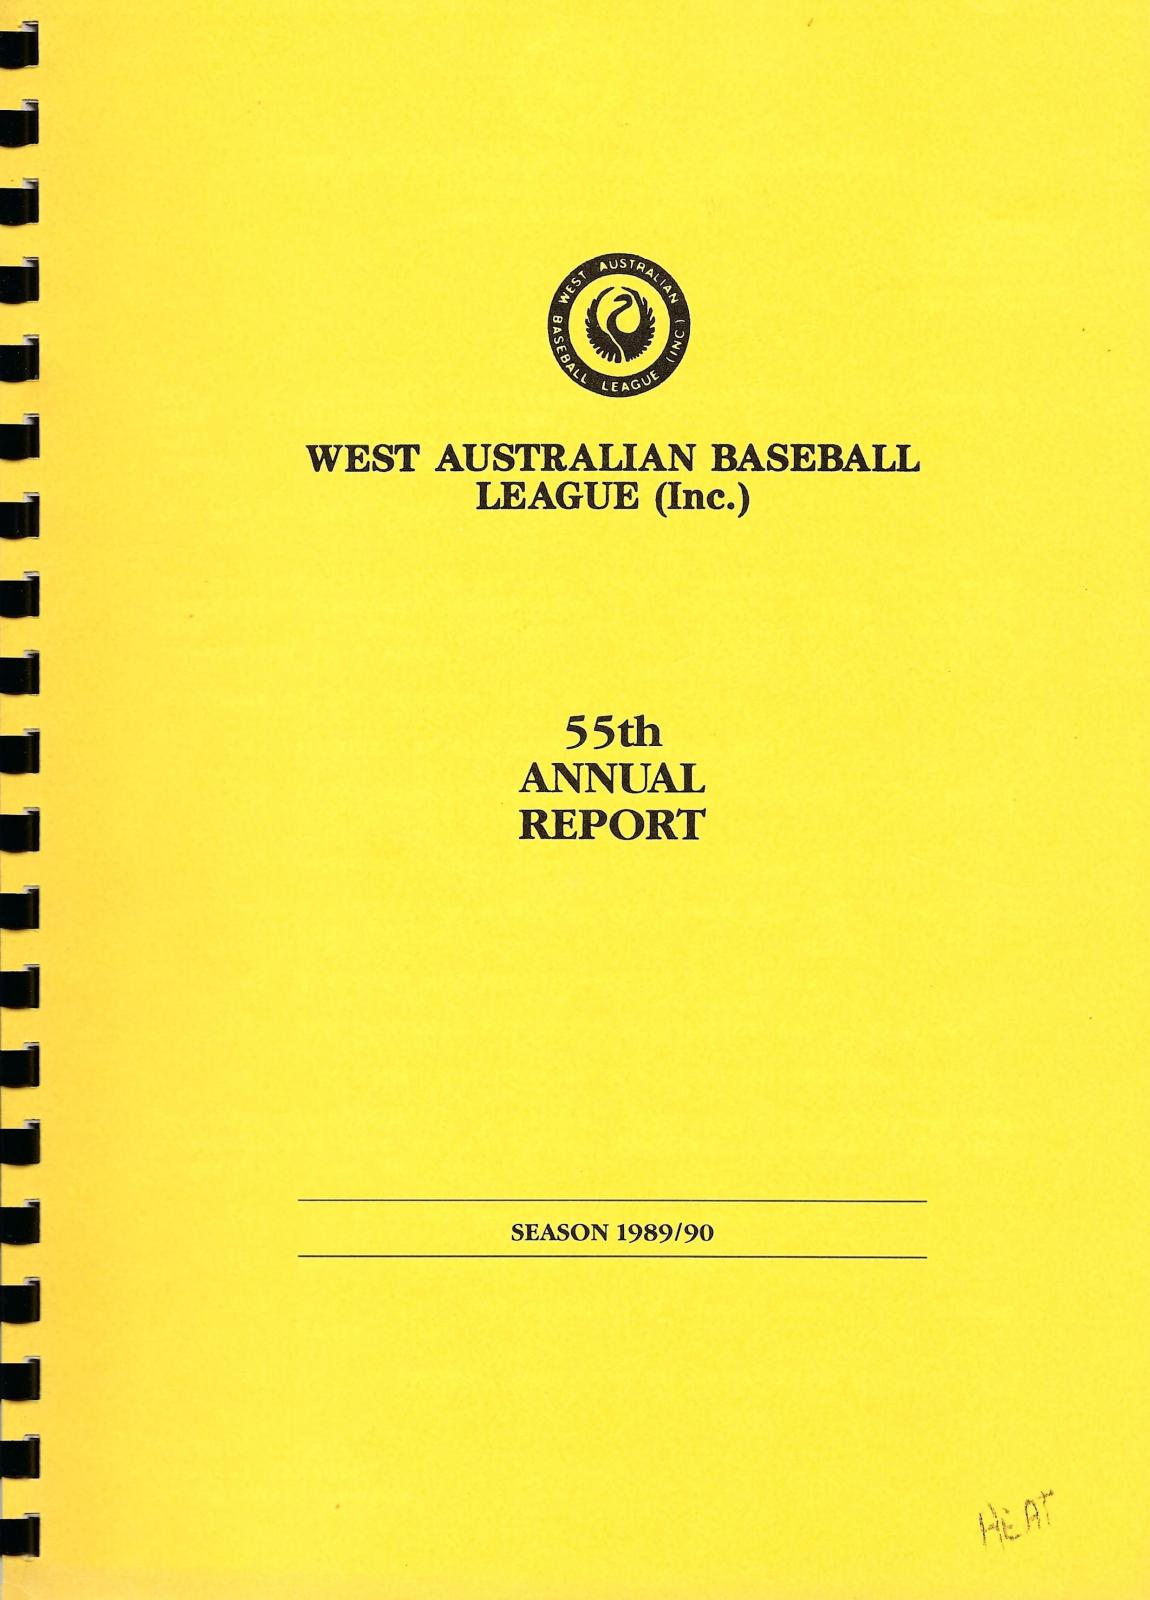 West Australian Baseball League 55th Annual Report 1989-90 cover page